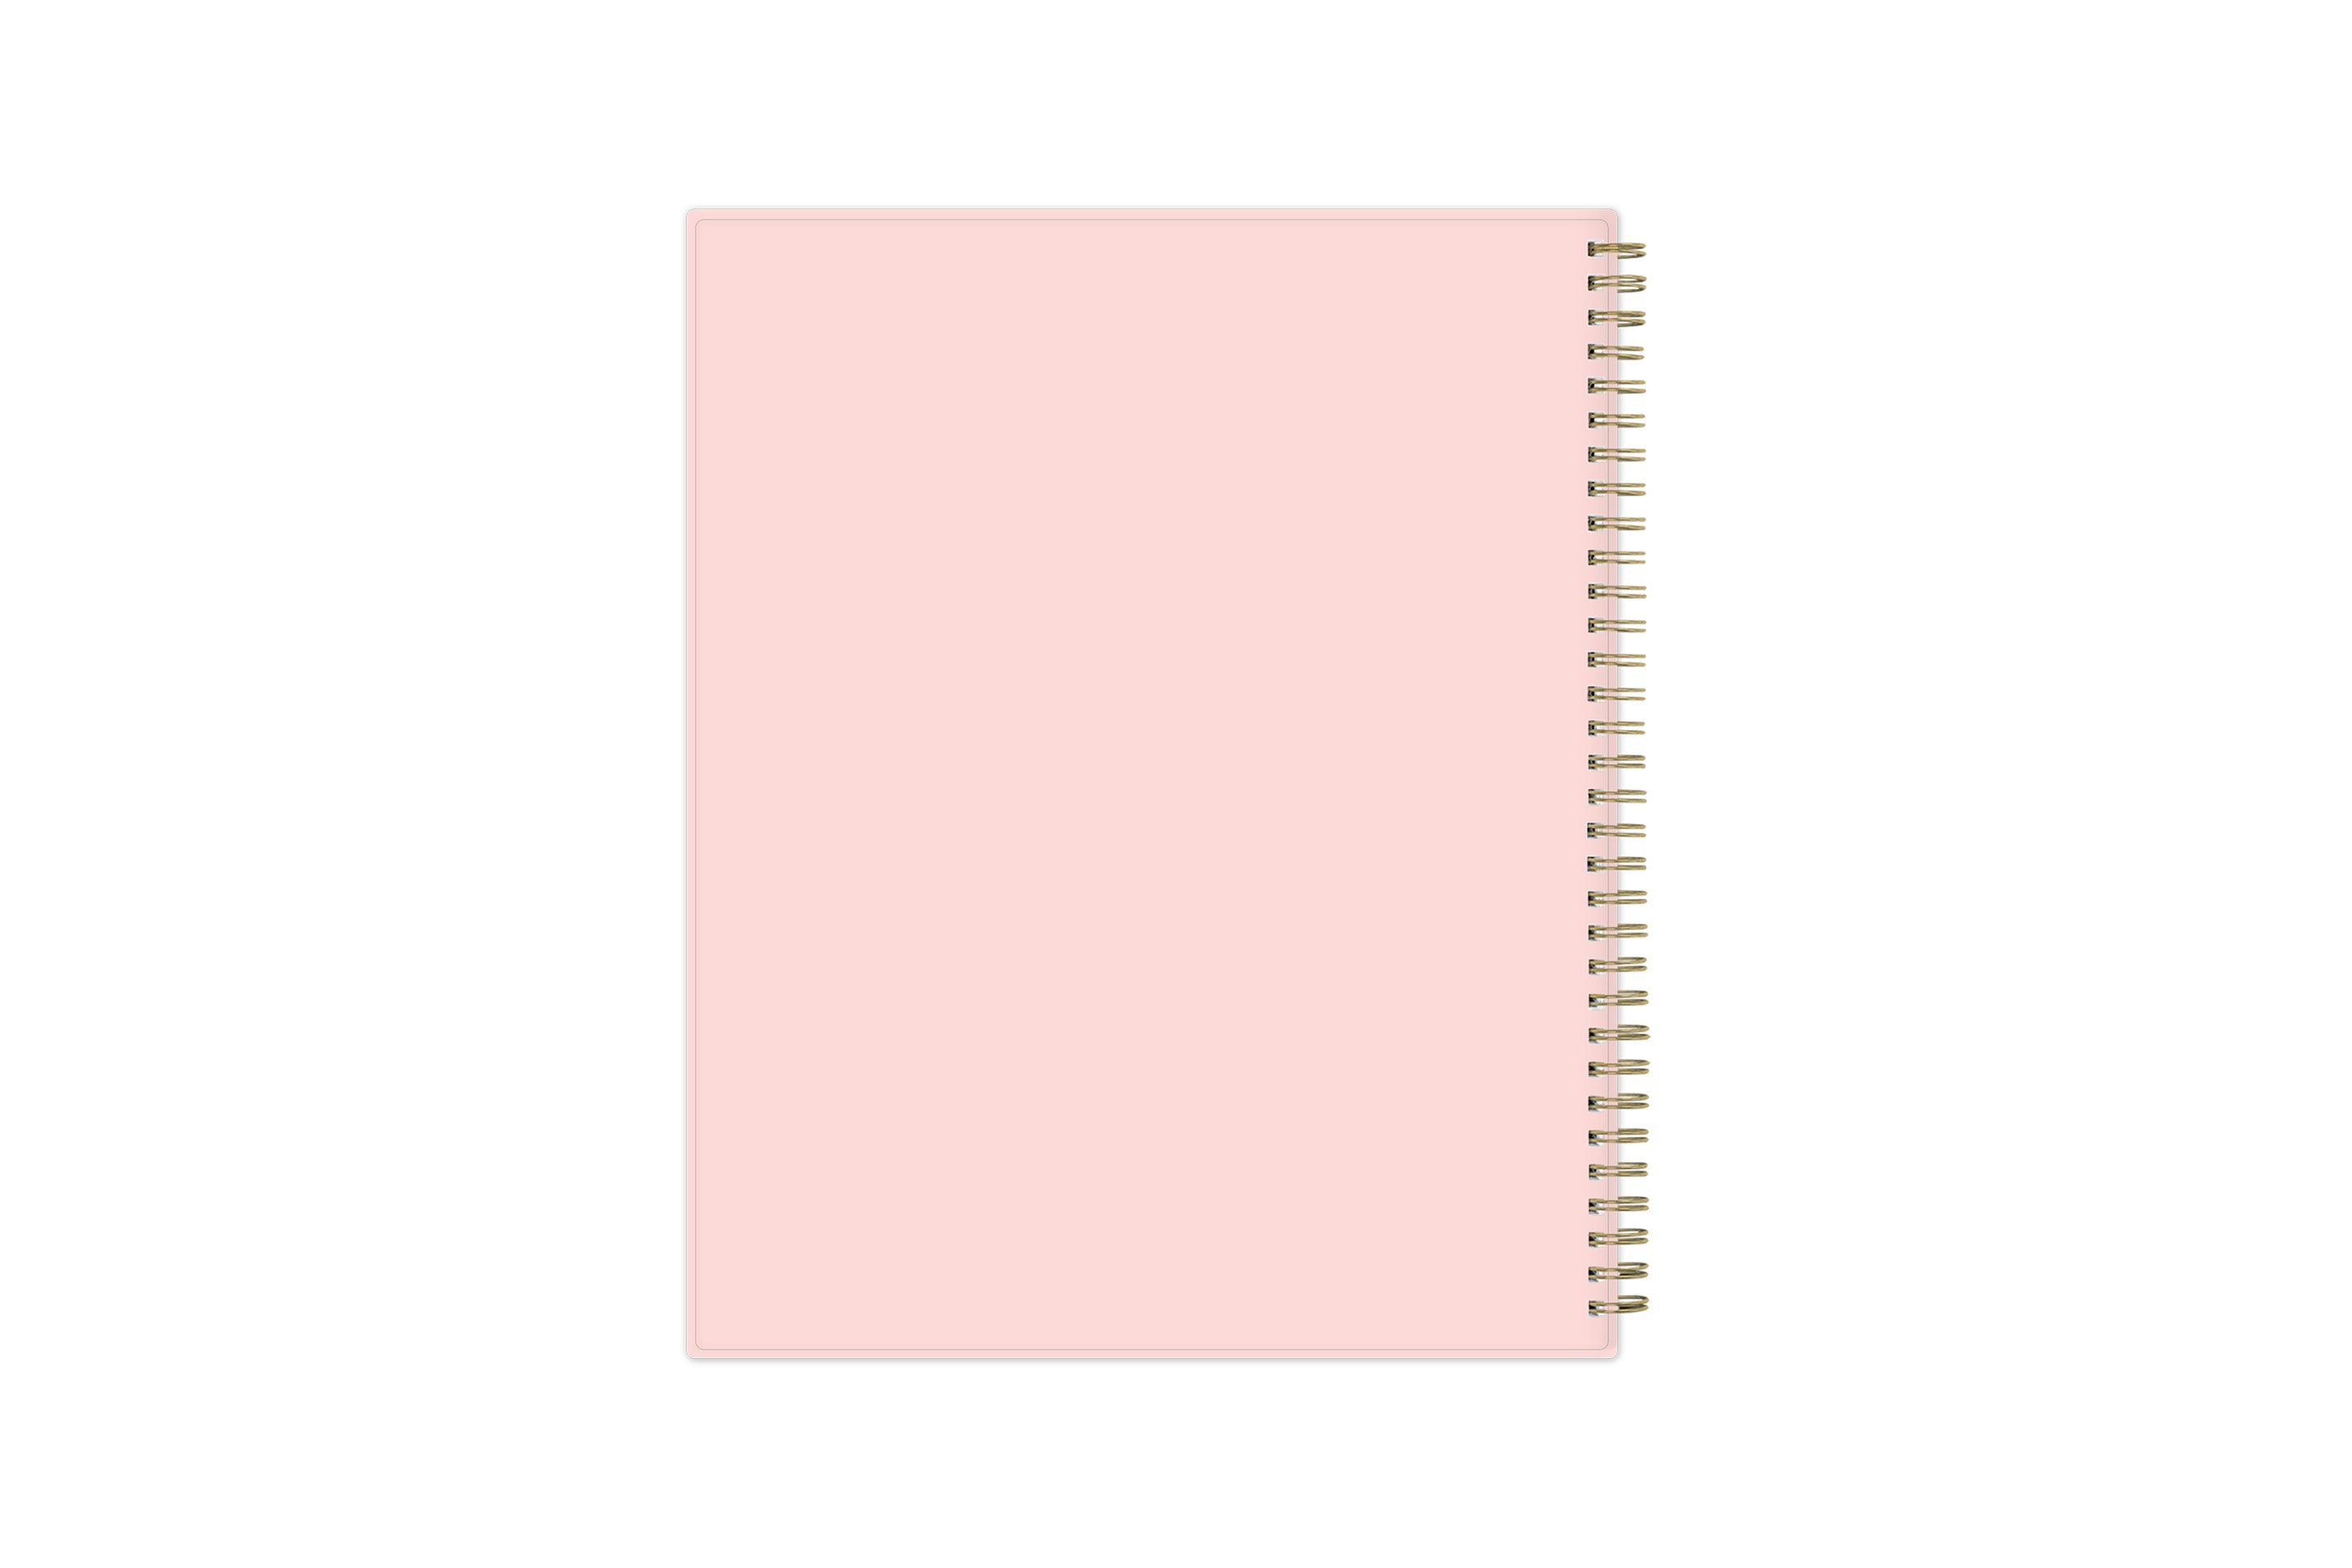 the 2023 weekly monthly planner features a soft pink back cover with gold twin wire-o binding